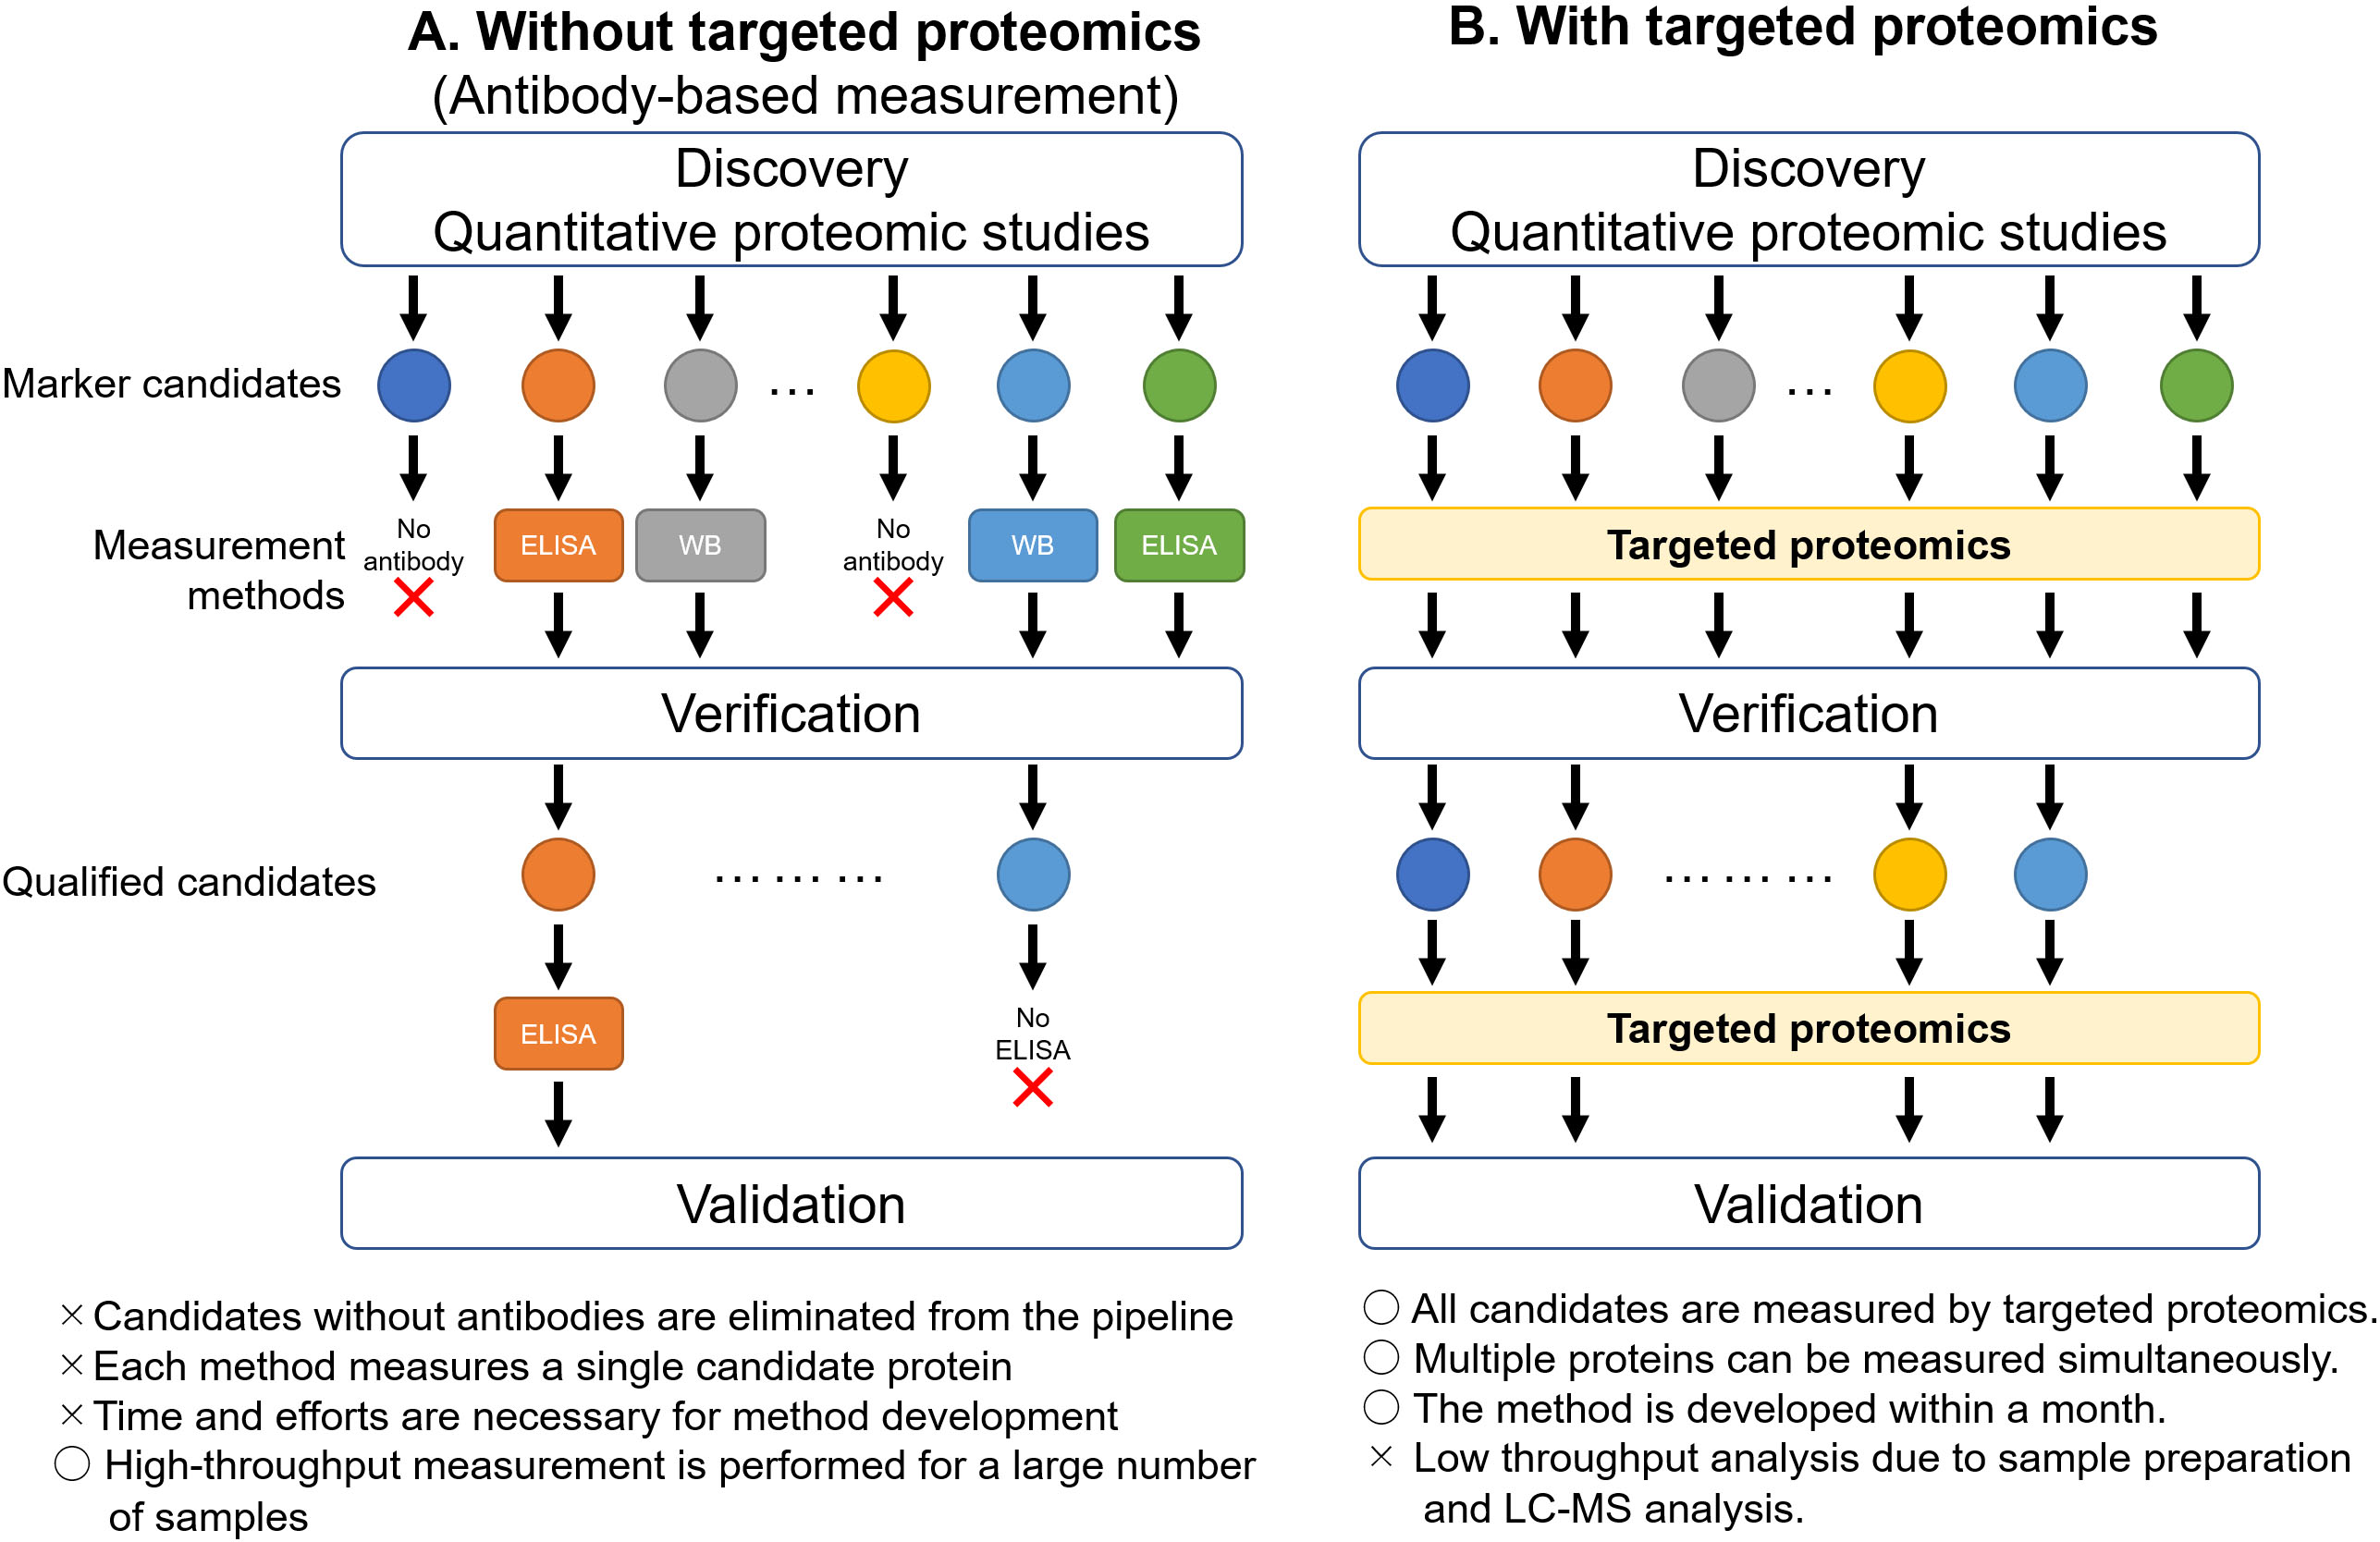 Acceleration of verification and validation phases by targeted proteomics. A. Without targeted proteomics, the candidate proteins identified by proteomic studies need to be quantified by antibody-based measurements, such as ELISA or western blot, in the verification phase. The proteins, for which antibodies are not available, are dropped out from the pipeline. The proteins approved during verification move on to the validation phase. Specific antibodies can be used in some proteins for western blot, but not for ELISA. In such cases, the proteins are eliminated from the pipeline. B. By utilizing targeted proteomics, the candidate proteins can be quantified simultaneously. The proteins qualified in the verification phase can also be measured by targeted proteomics in the validation phase. ELISA, enzyme-linked immunosorbent assay; WB, western blot.